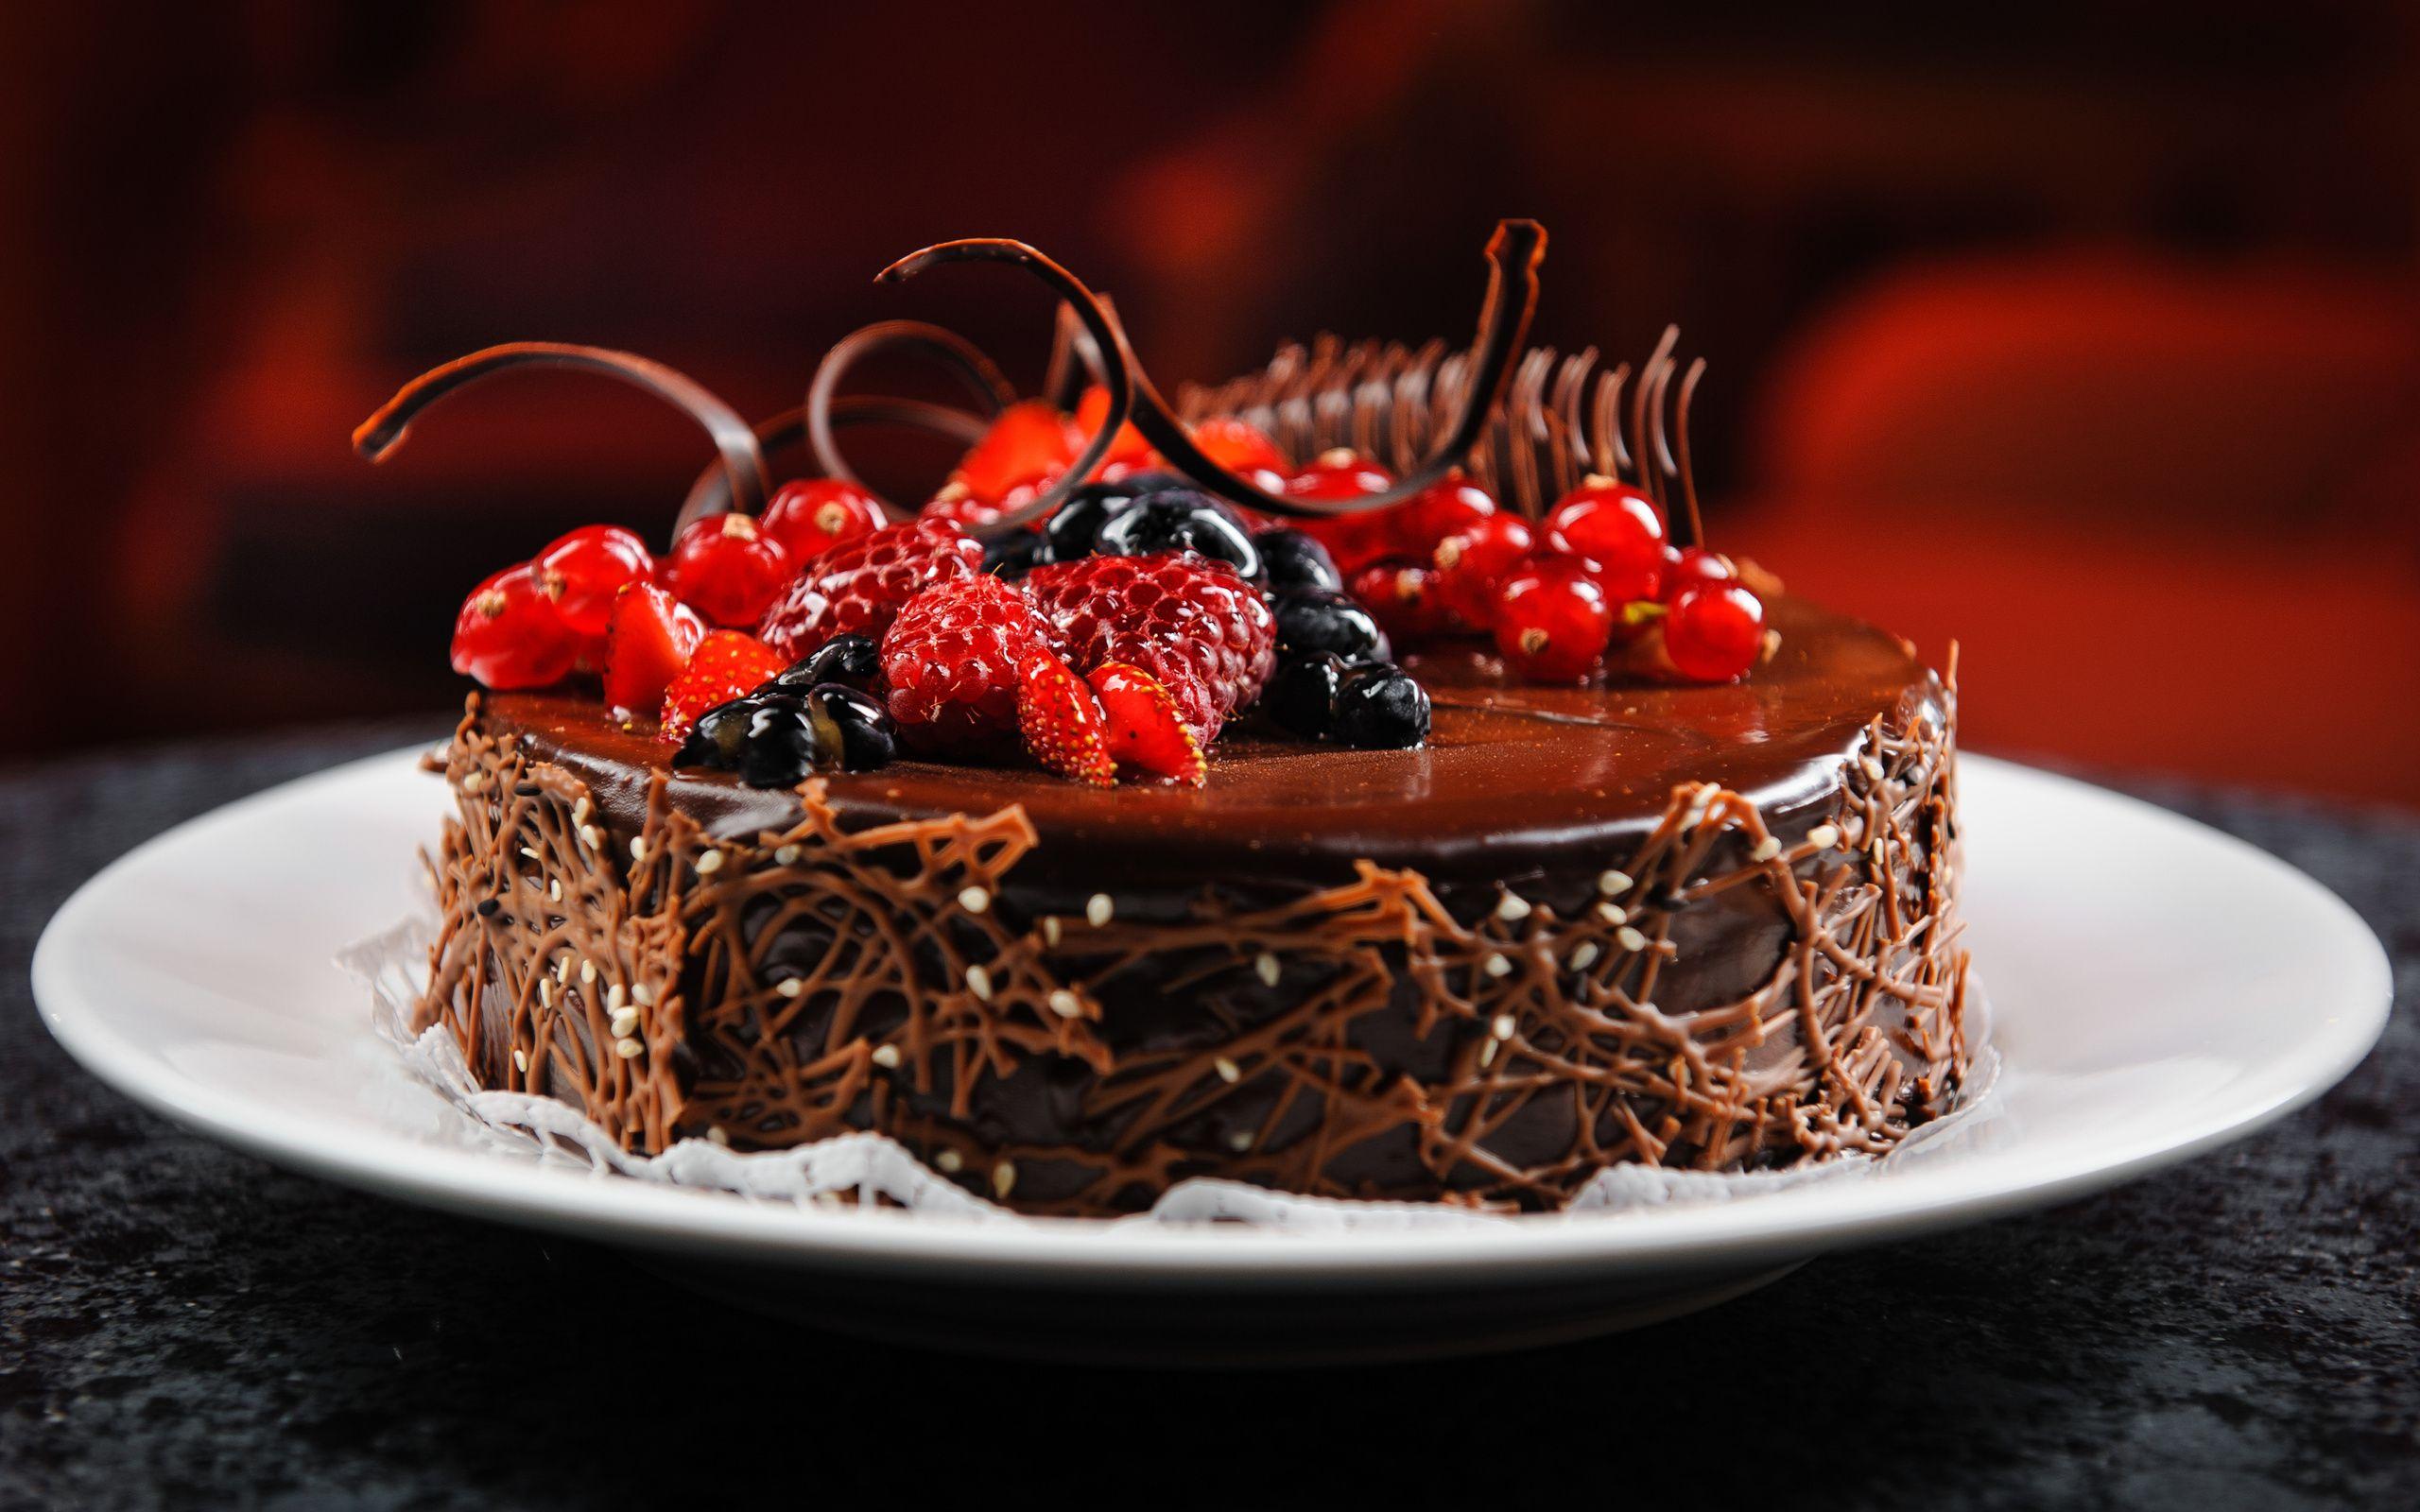 Chocolate Cake Wallpapers - Top Free Chocolate Cake Backgrounds